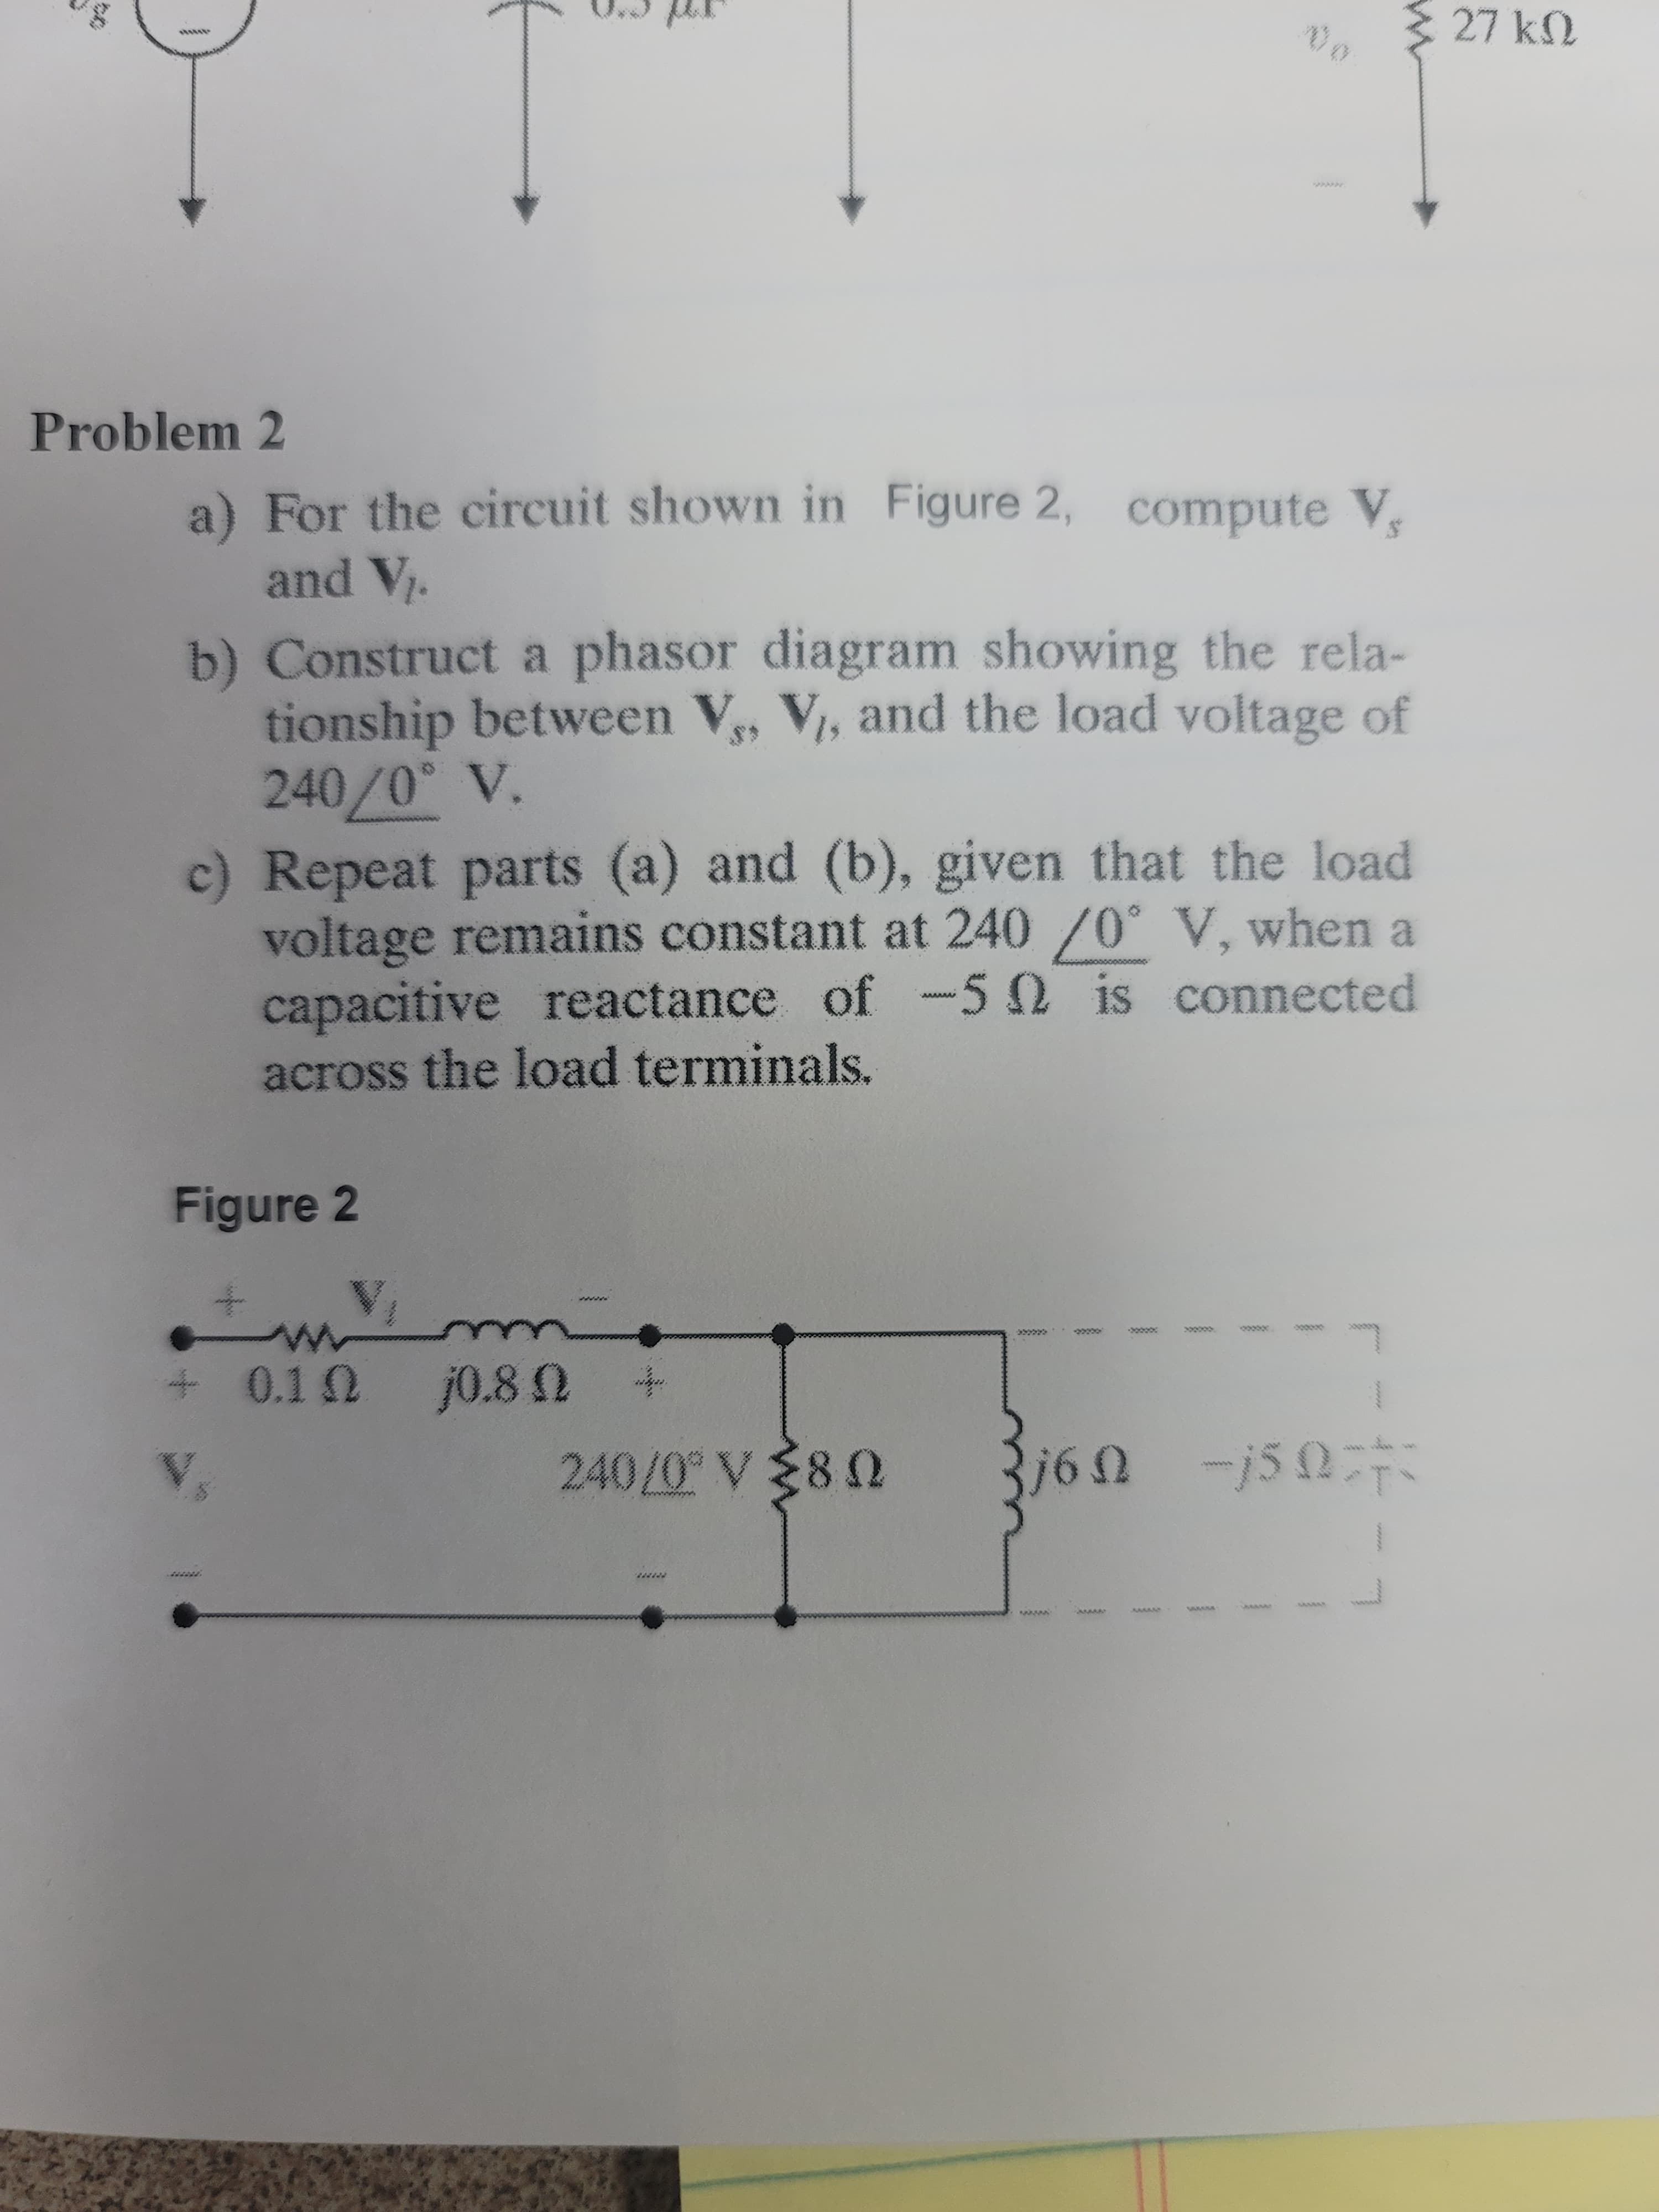 W27 kN
wwww
ywww.
Problem 2
a) For the circuit shown in Figure 2, compute V,
and V.
b) Construct a phasor diagram showing the rela-
tionship between V, V, and the load voltage of
240/0° V.
c) Repeat parts (a) and (b), given that the load
voltage remains constant at 240/0° V, when a
capacitive reactance of -50 is connected
across the load terminals.
Figure 2
ccce
240/0° V80
1.0/04
